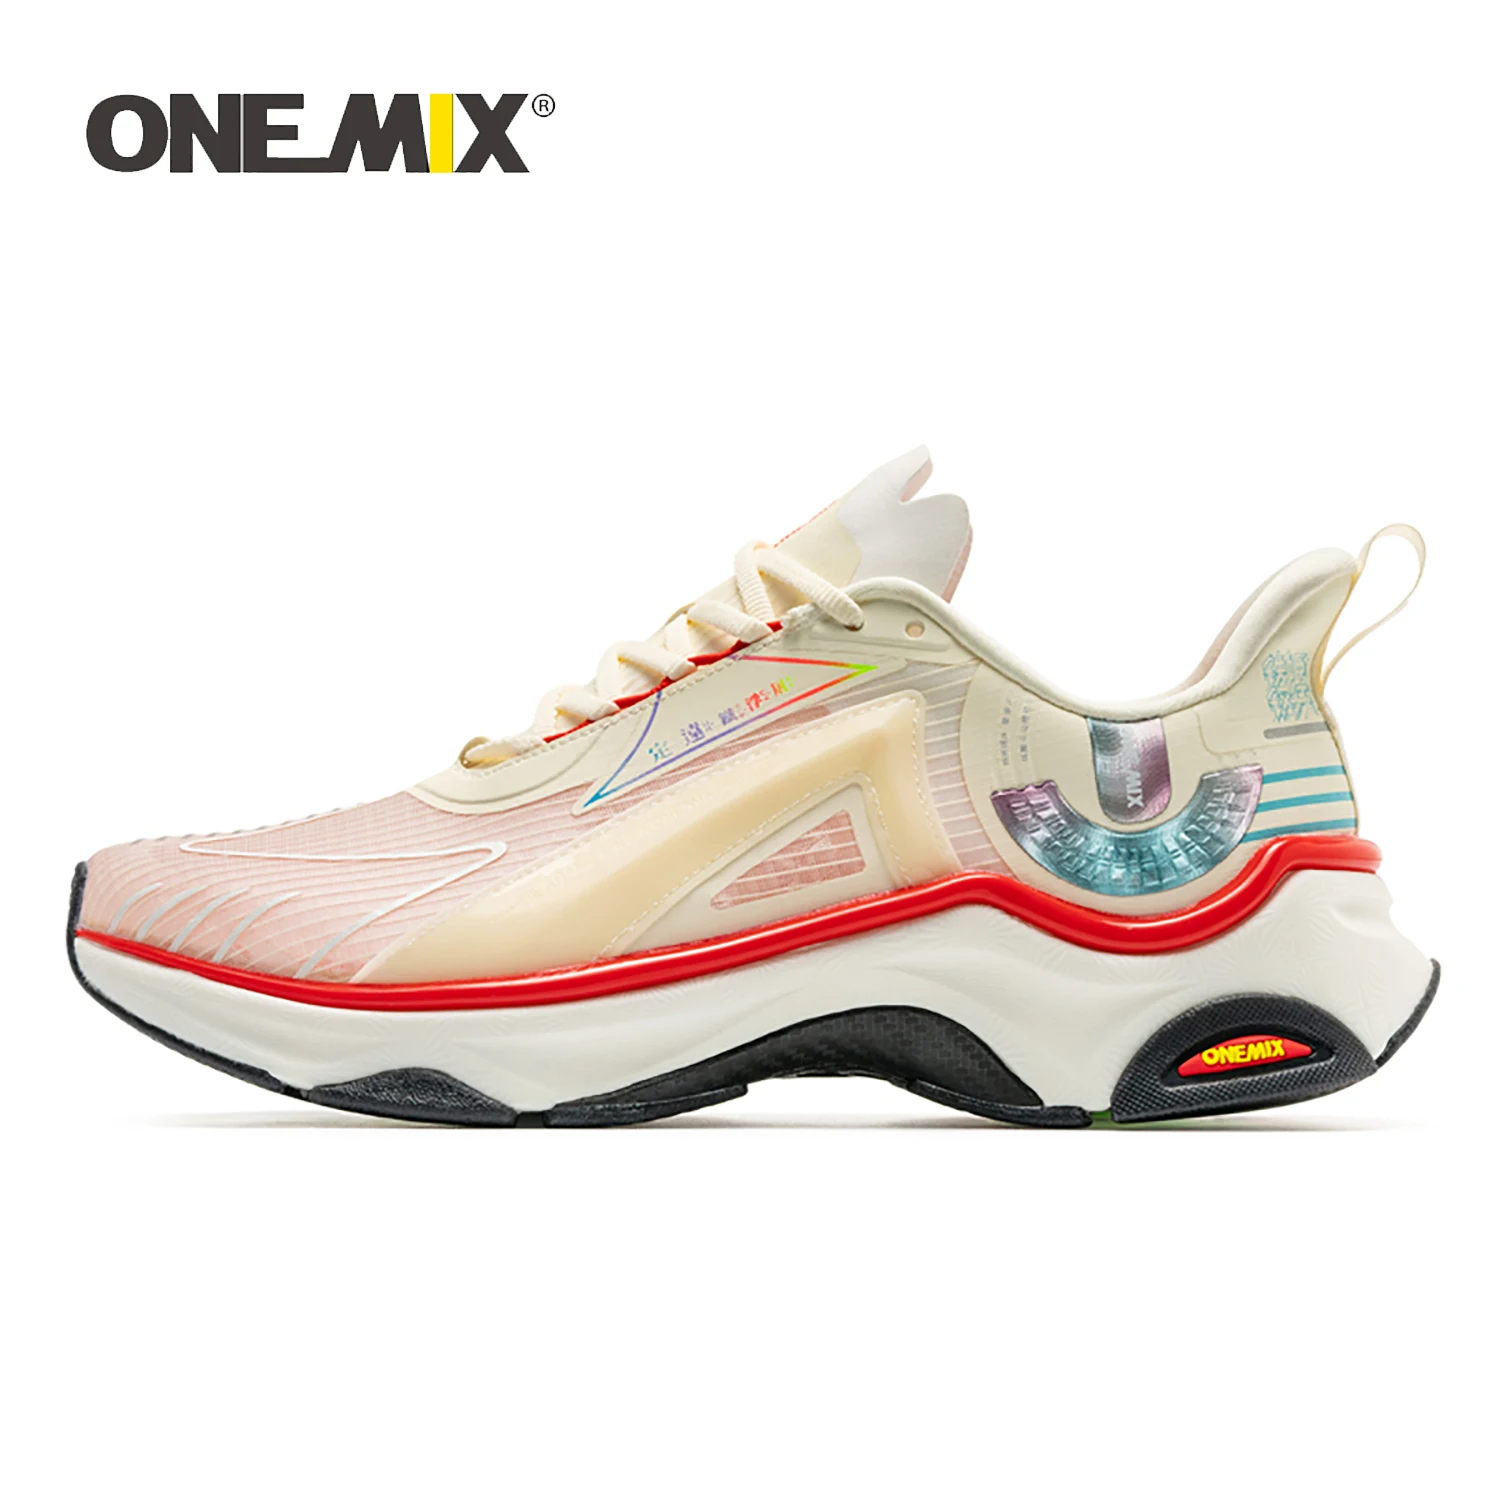 ONEMIX Original Shoes Men Sneakers Breathable Anti Slip Cushioning Road Runs Shoes Outdoor Walking Sneaker no carbon plate